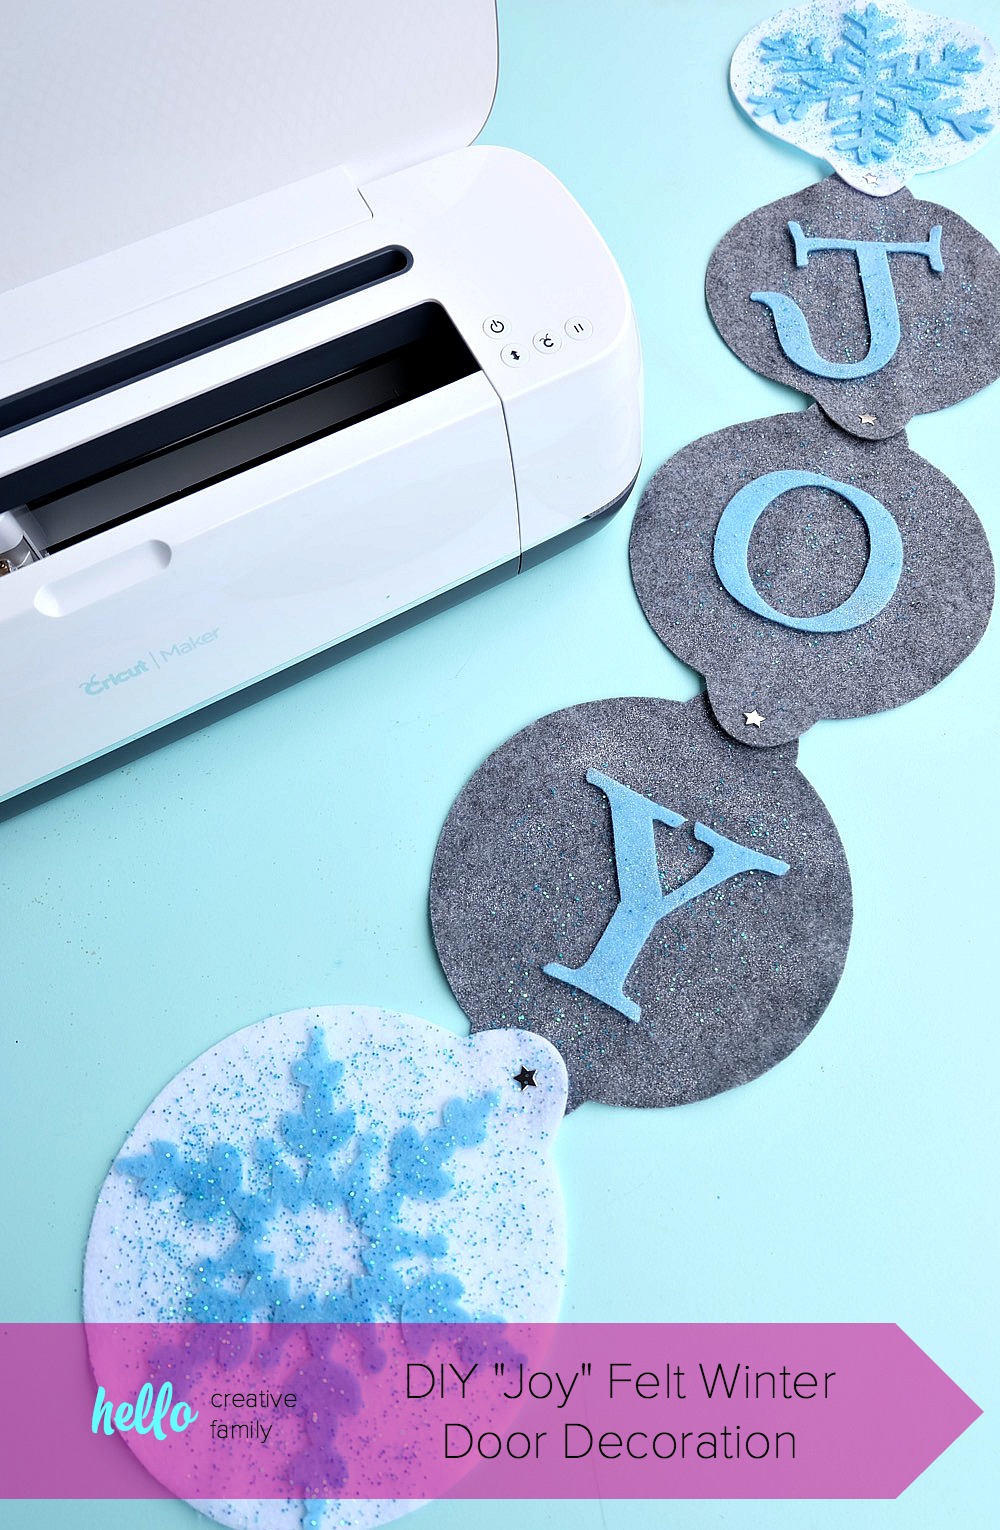 The new Cricut Maker cuts felt like butter! Learn how to make this DIY "Joy" Felt Winter Door Decoration in this no sew project that's perfect for a front door Christmas wreath substitute! How pretty are the sparkle snowflakes? #CricutMade #CricutHoliday #ChristmasCrafts #sponsored